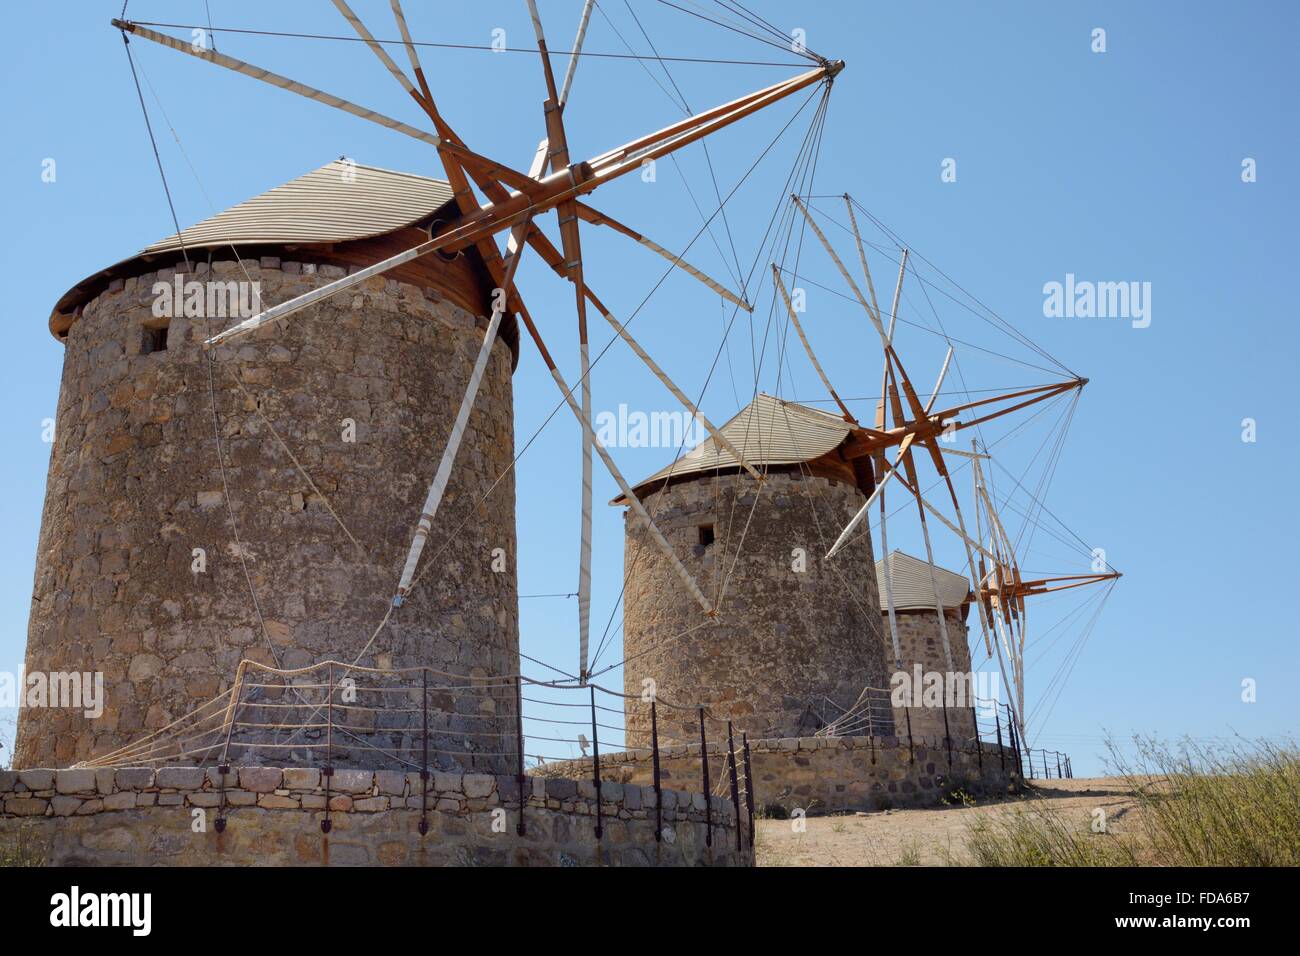 Restored windmills of the Monastery of St. John the Theologian, Chora, Patmos, Dodecanese Islands, Greece. Stock Photo